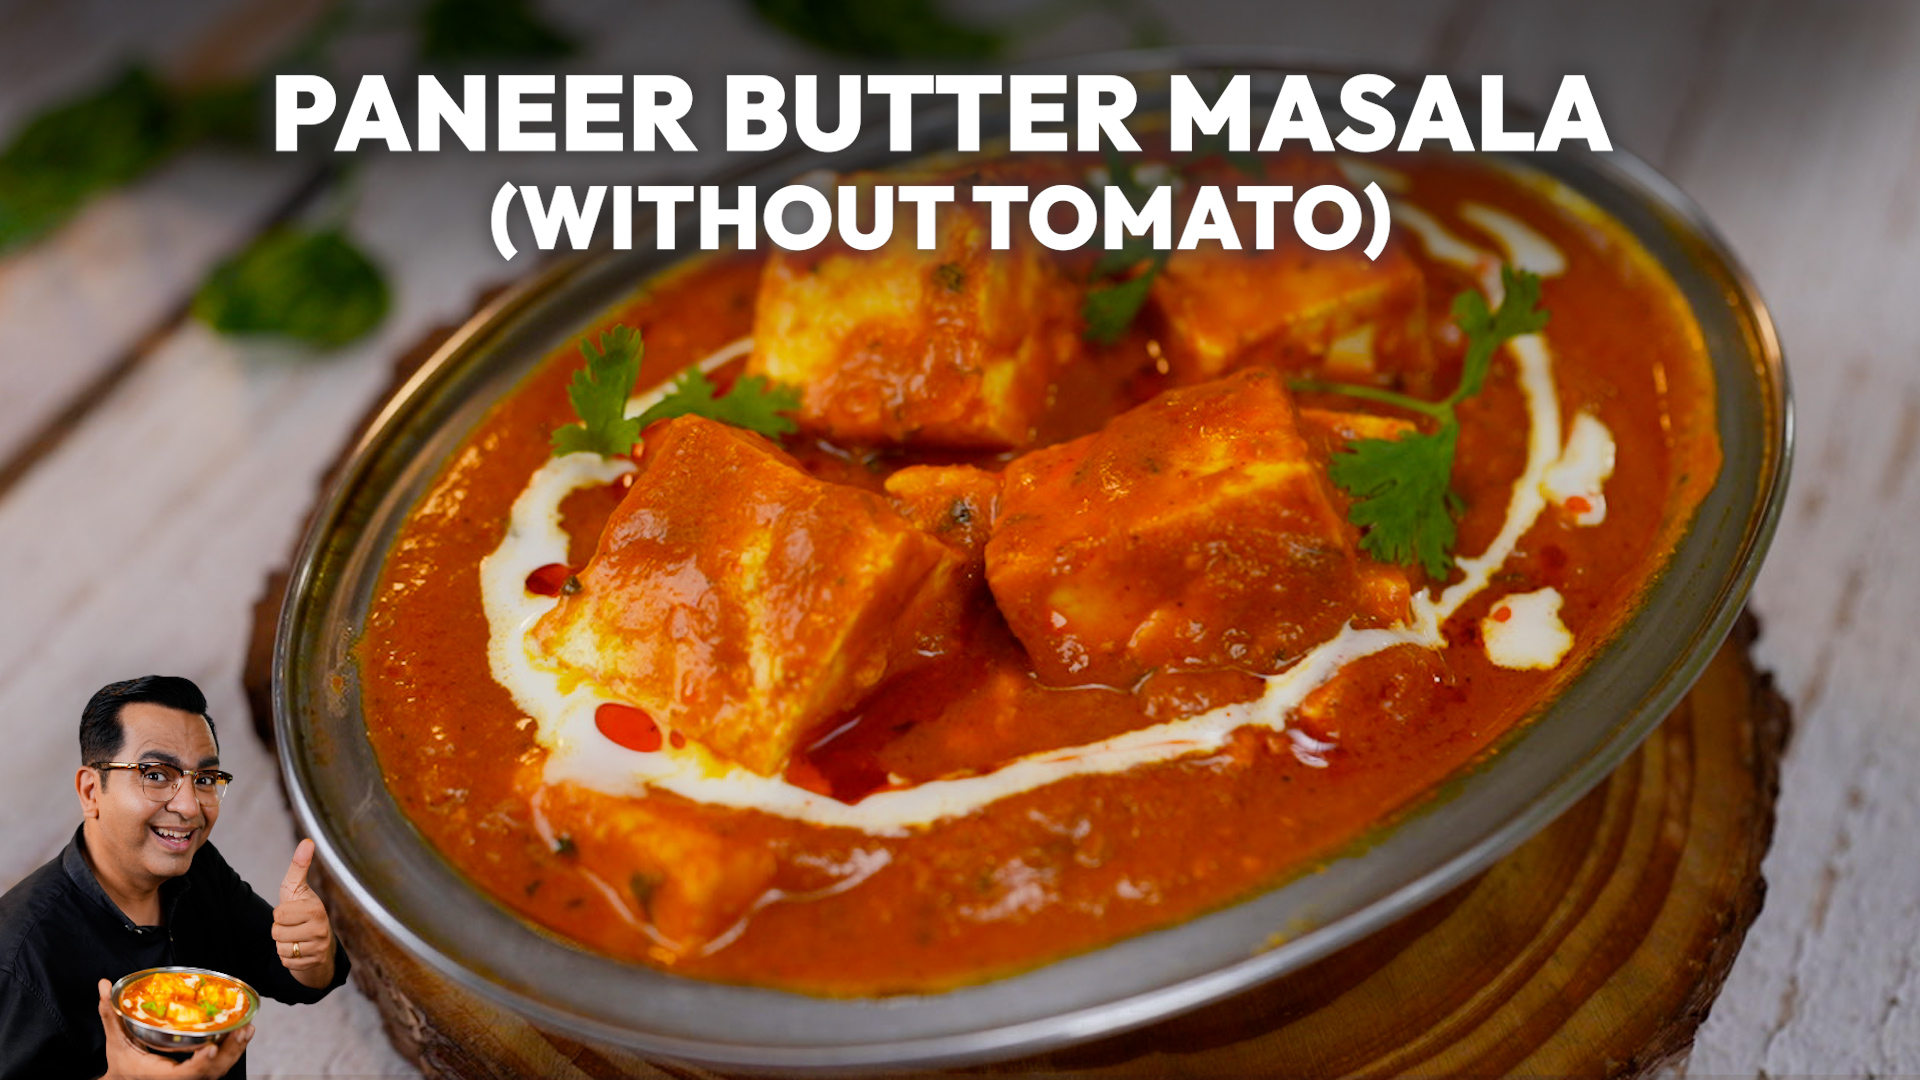 Paneer Butter Masala without Tomato Recipe